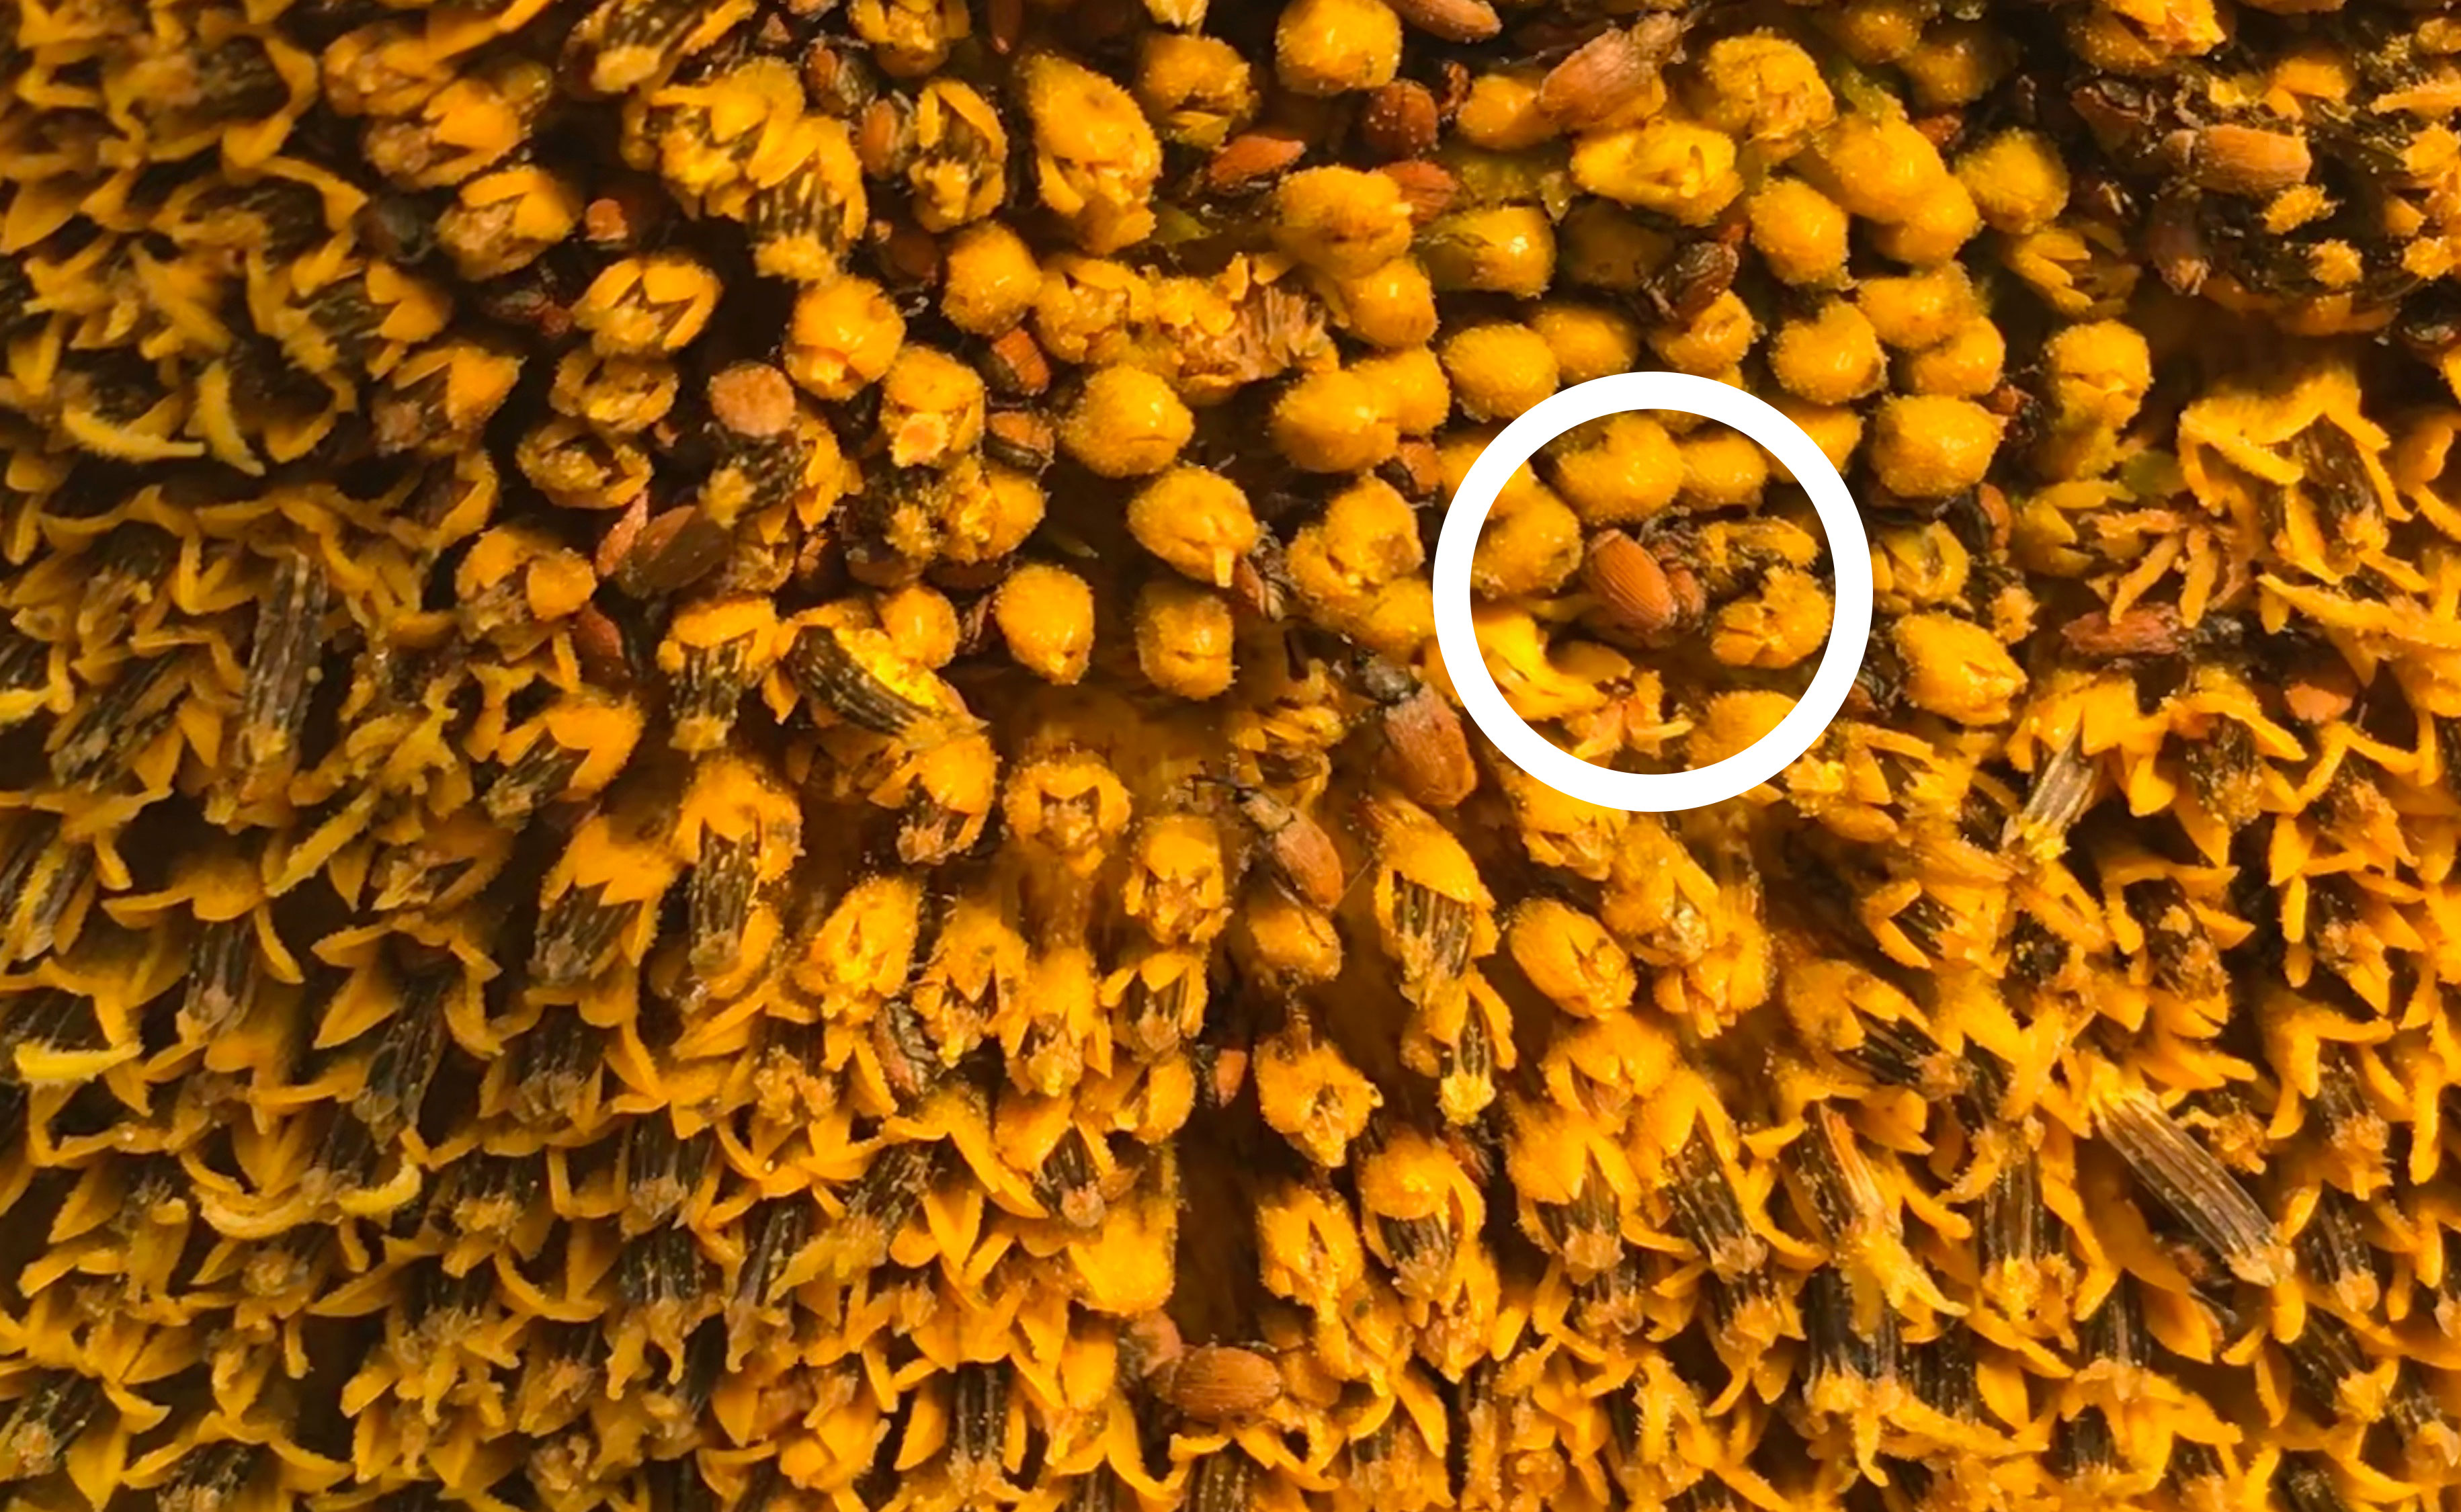 Several red-brown colored weevils crawling on the yellow florets of a sunflower.